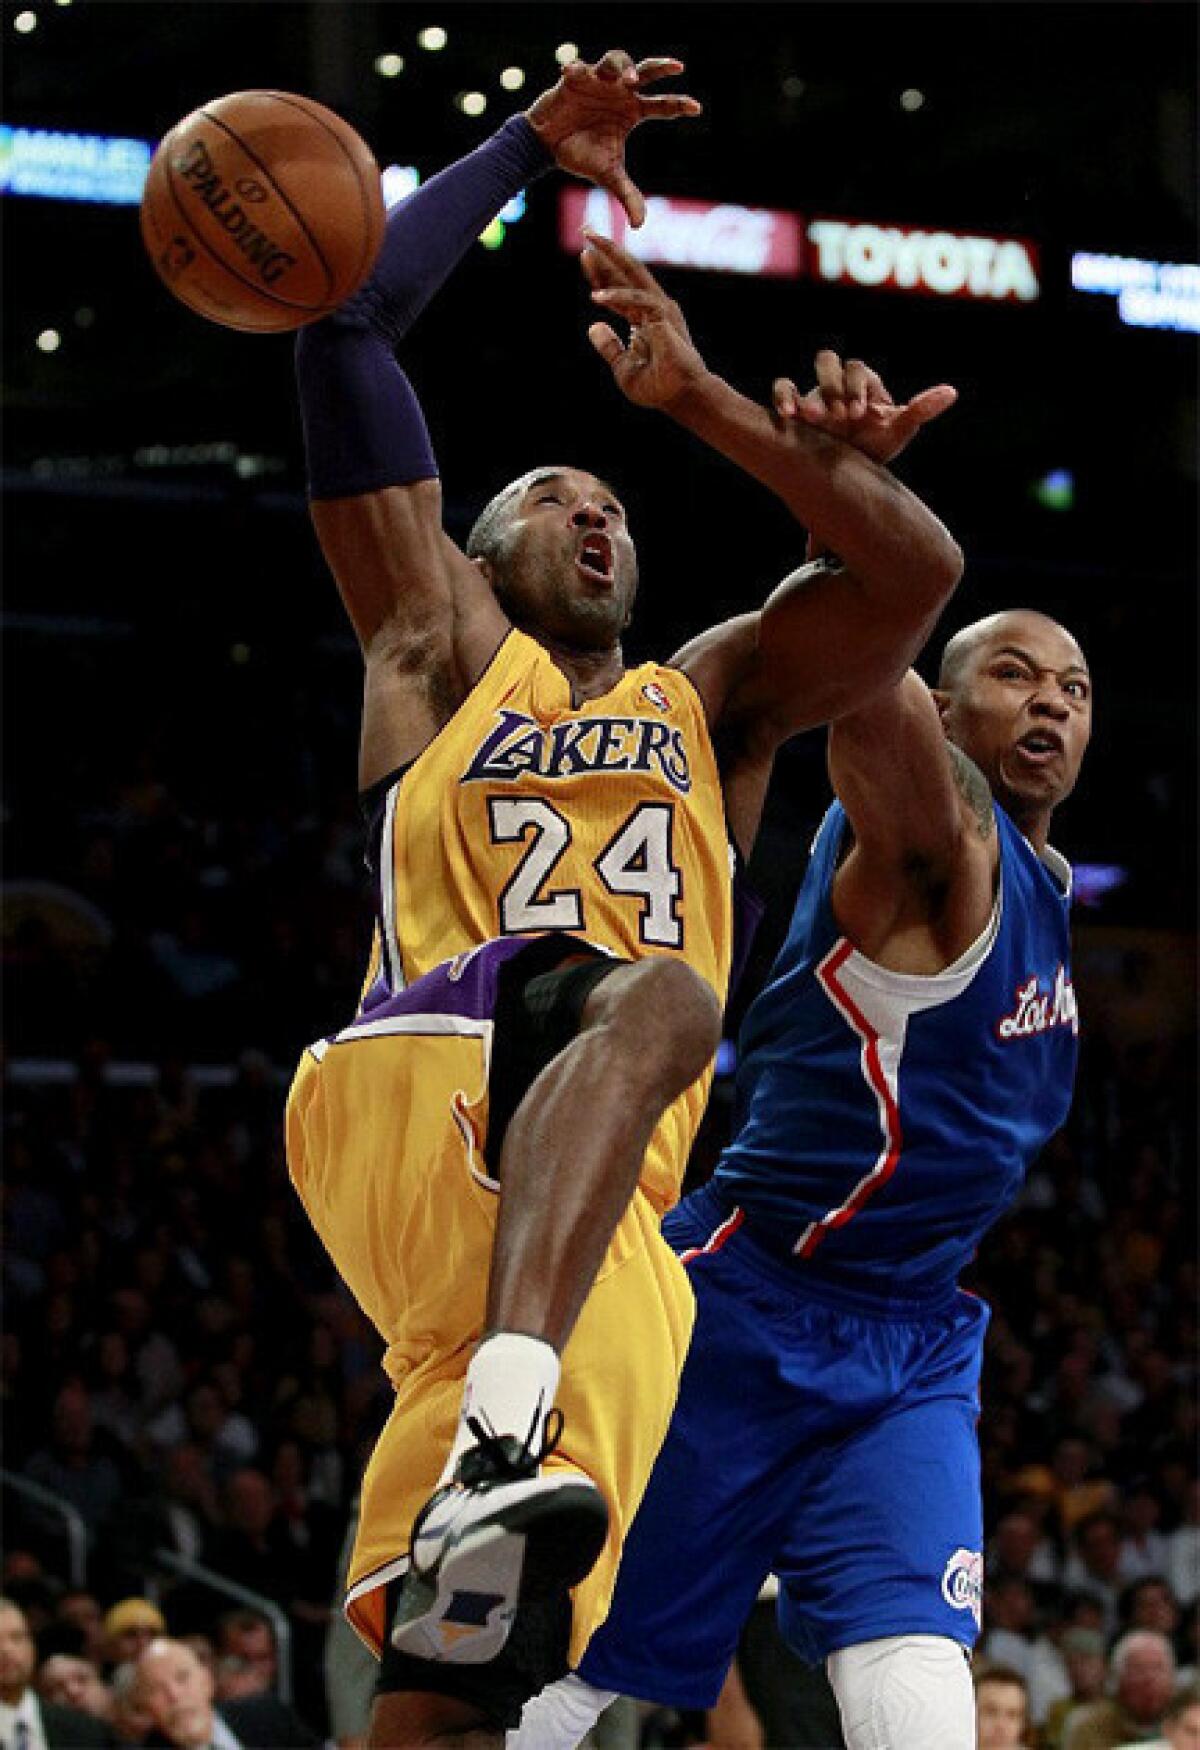 Caron Butler strips the ball from Kobe Bryant as Bryant goes to the basket.